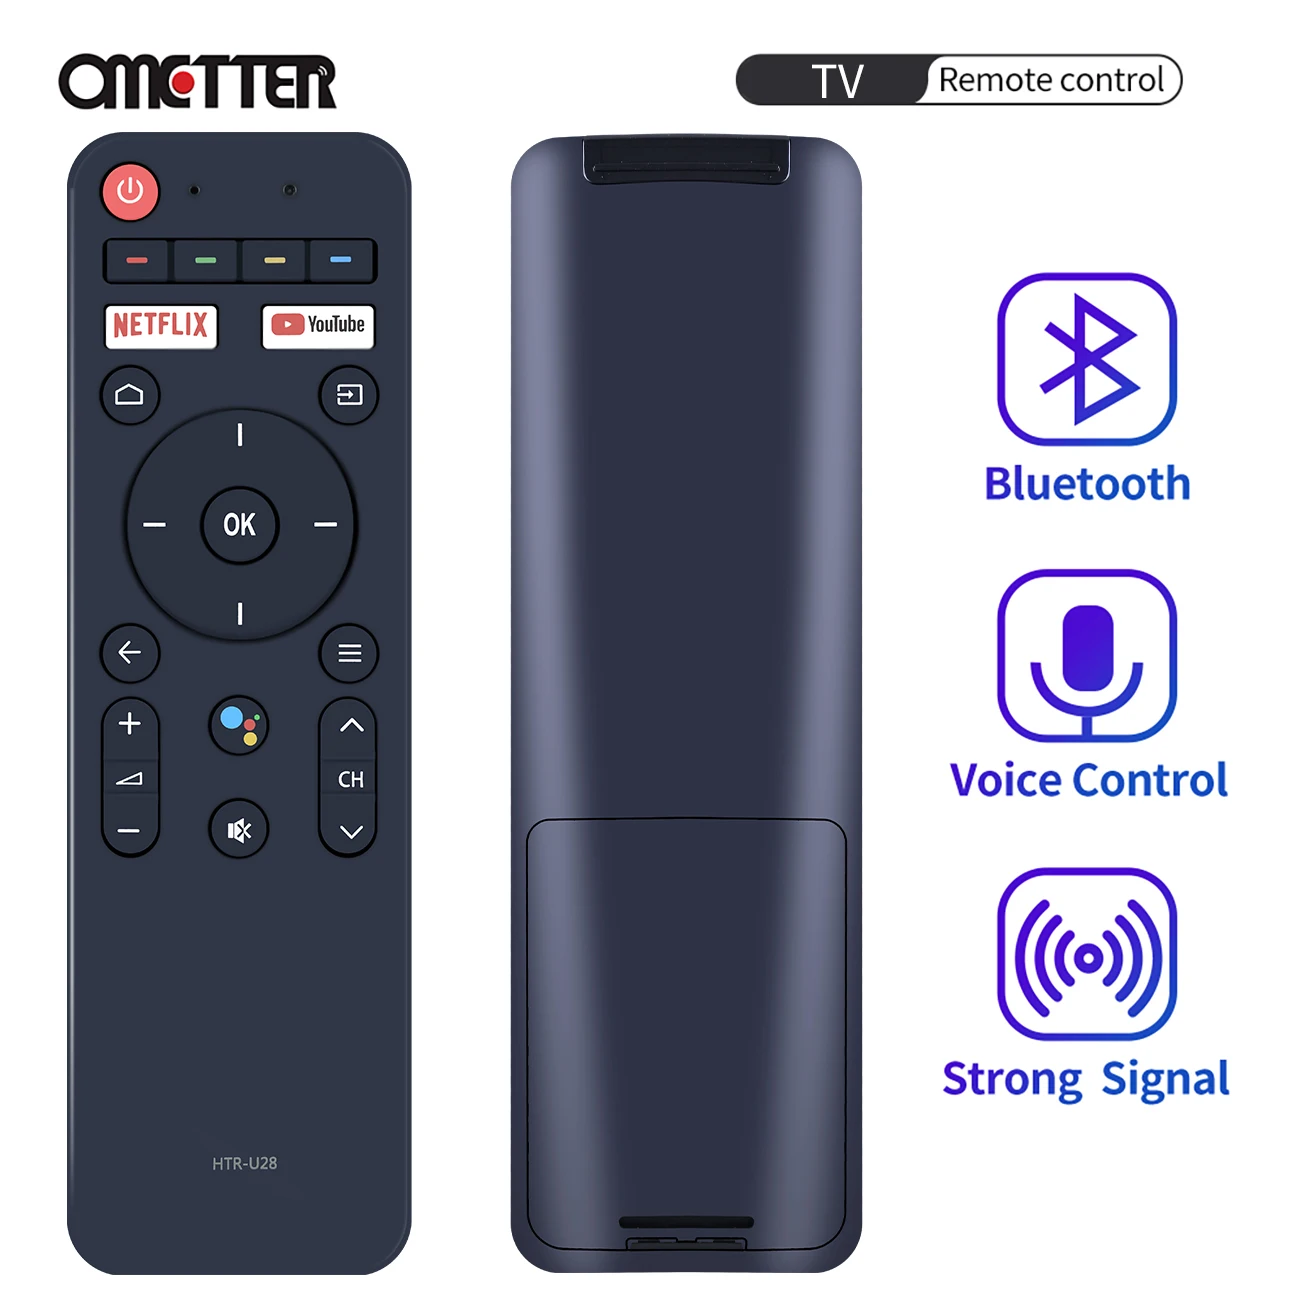 

New HTR-U28 Voice TV Remote Control For Haier HTR-U28 H50S6UG H55S6UG H65S6UG 4K UHD Smart Android